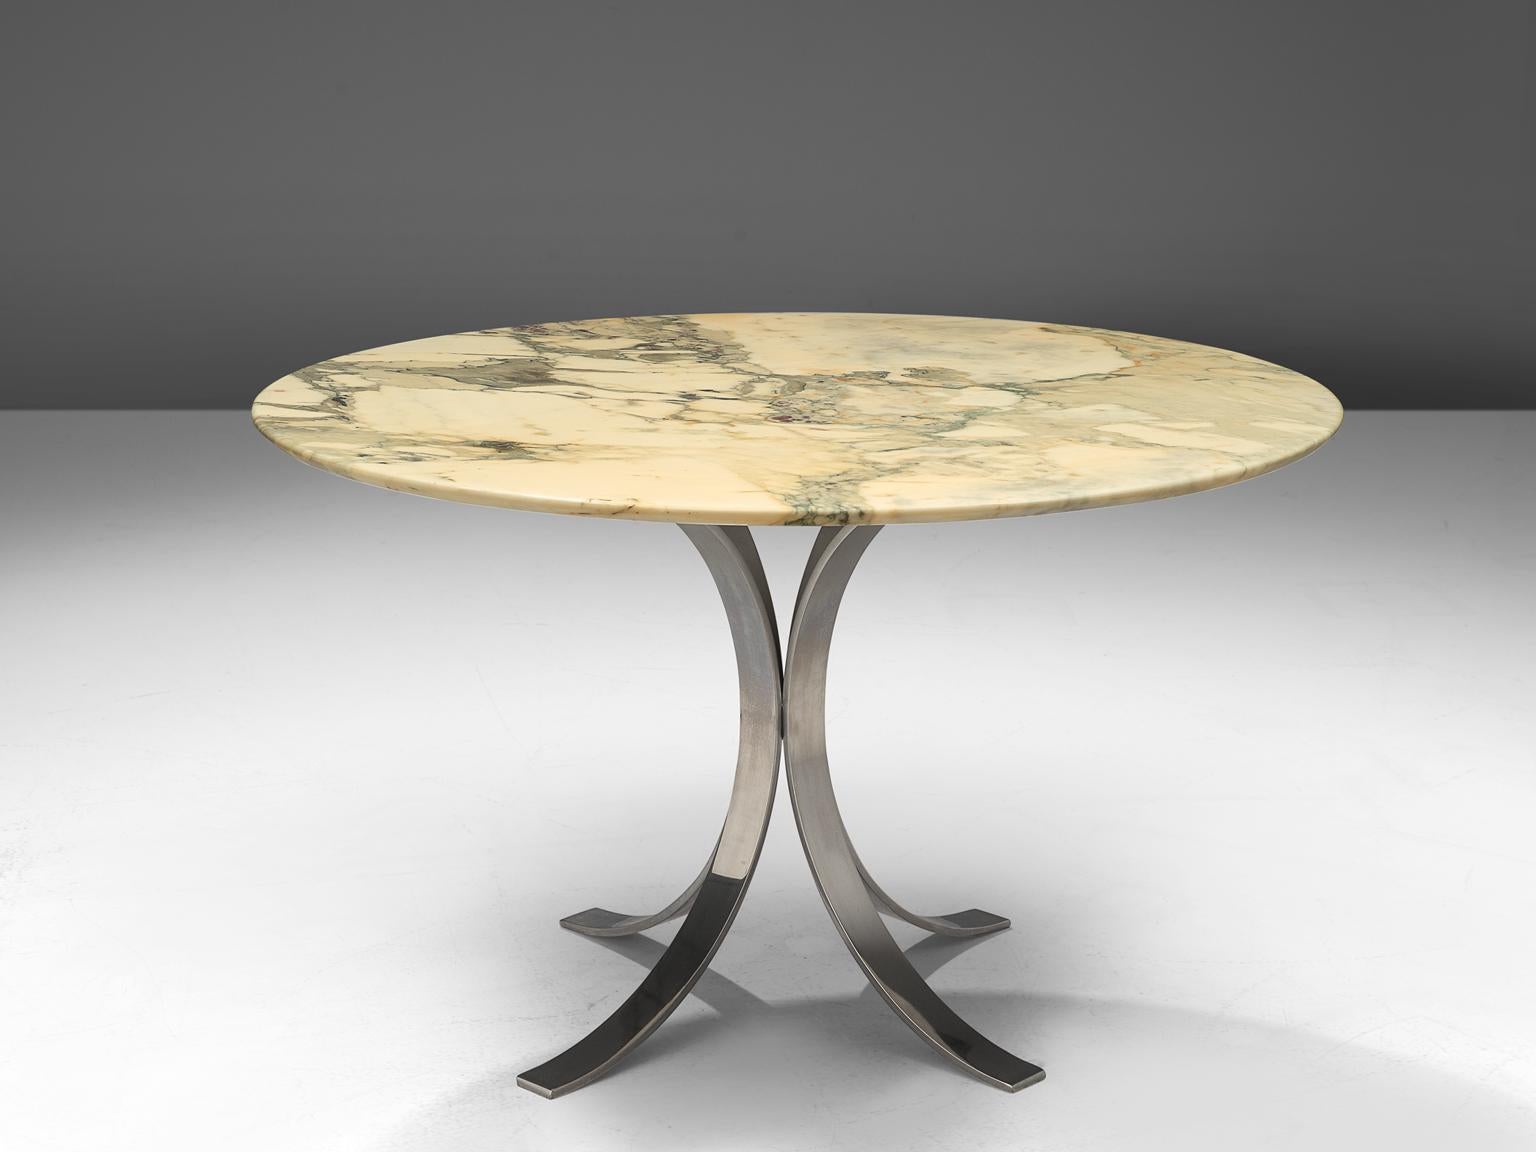 Osvaldo Borsani for Tecno, dining table, marble and metal, Italy, 19s63

Classic marble table, designed in 1963 by Osvaldo Borsani for Tecno, Italy. This elegant marble top shows an amazing grain in shades of beige and white with darker veins. The